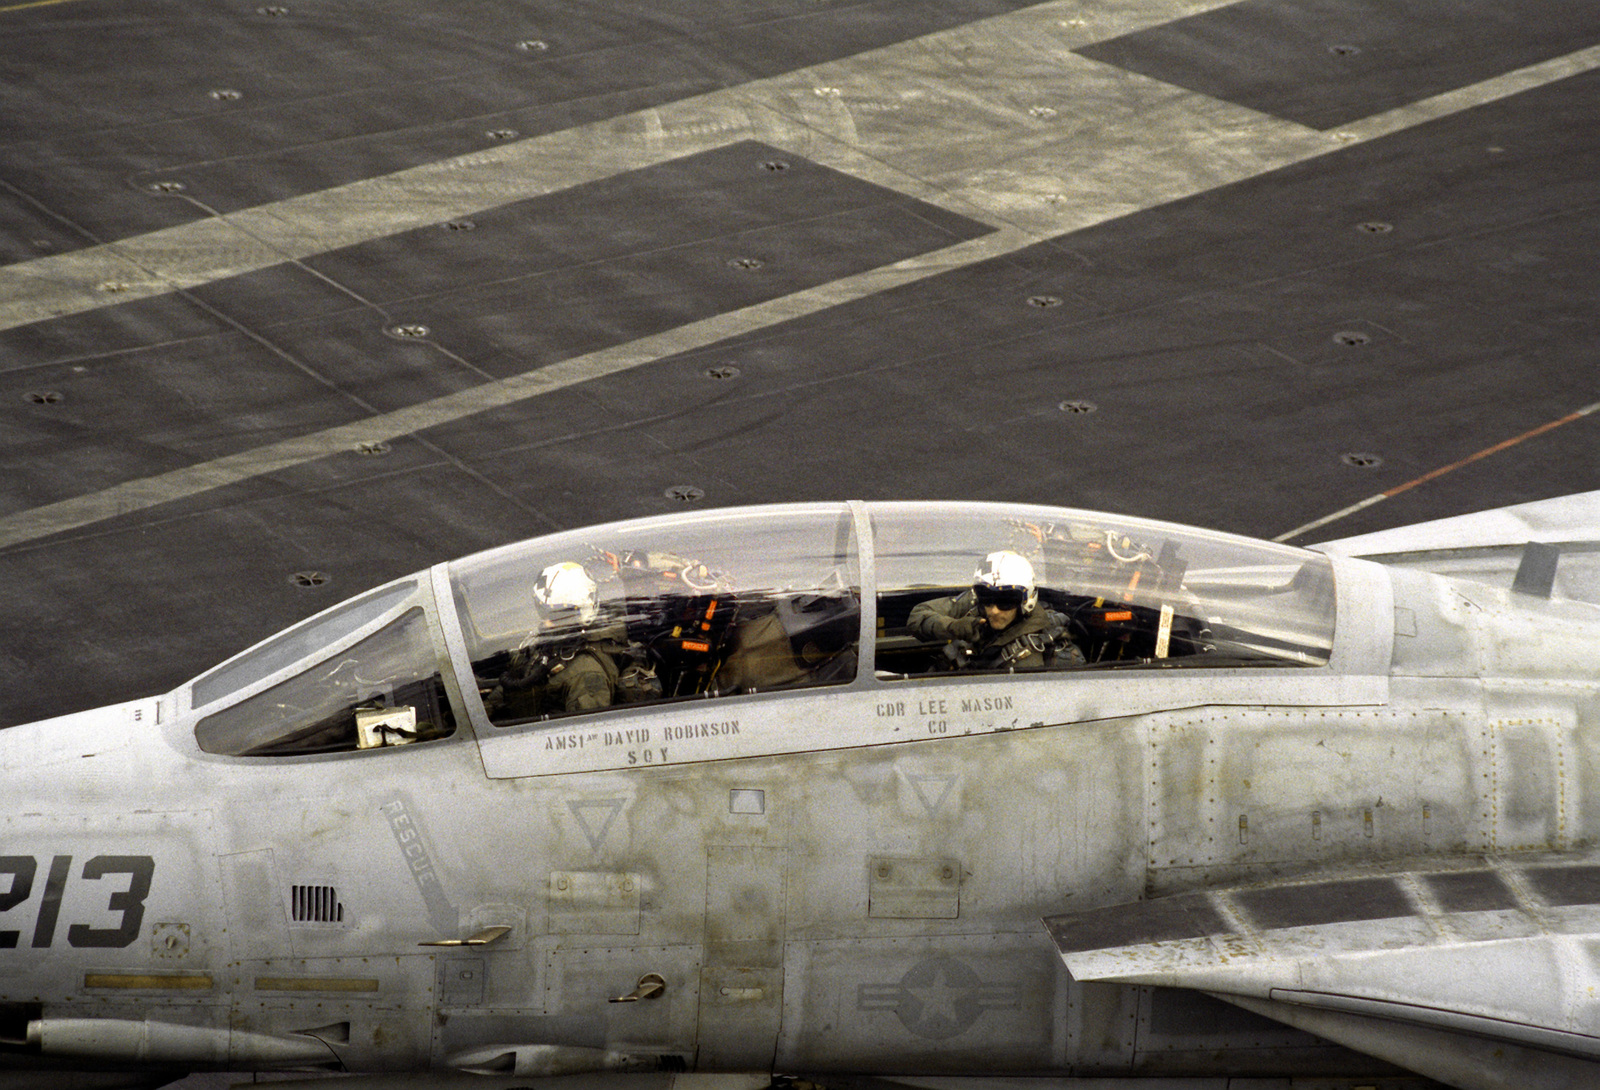 A Fighter Squadron 213 Vf 213 F 14 Tomcat Aircraft Taxies Out To Launch Position On